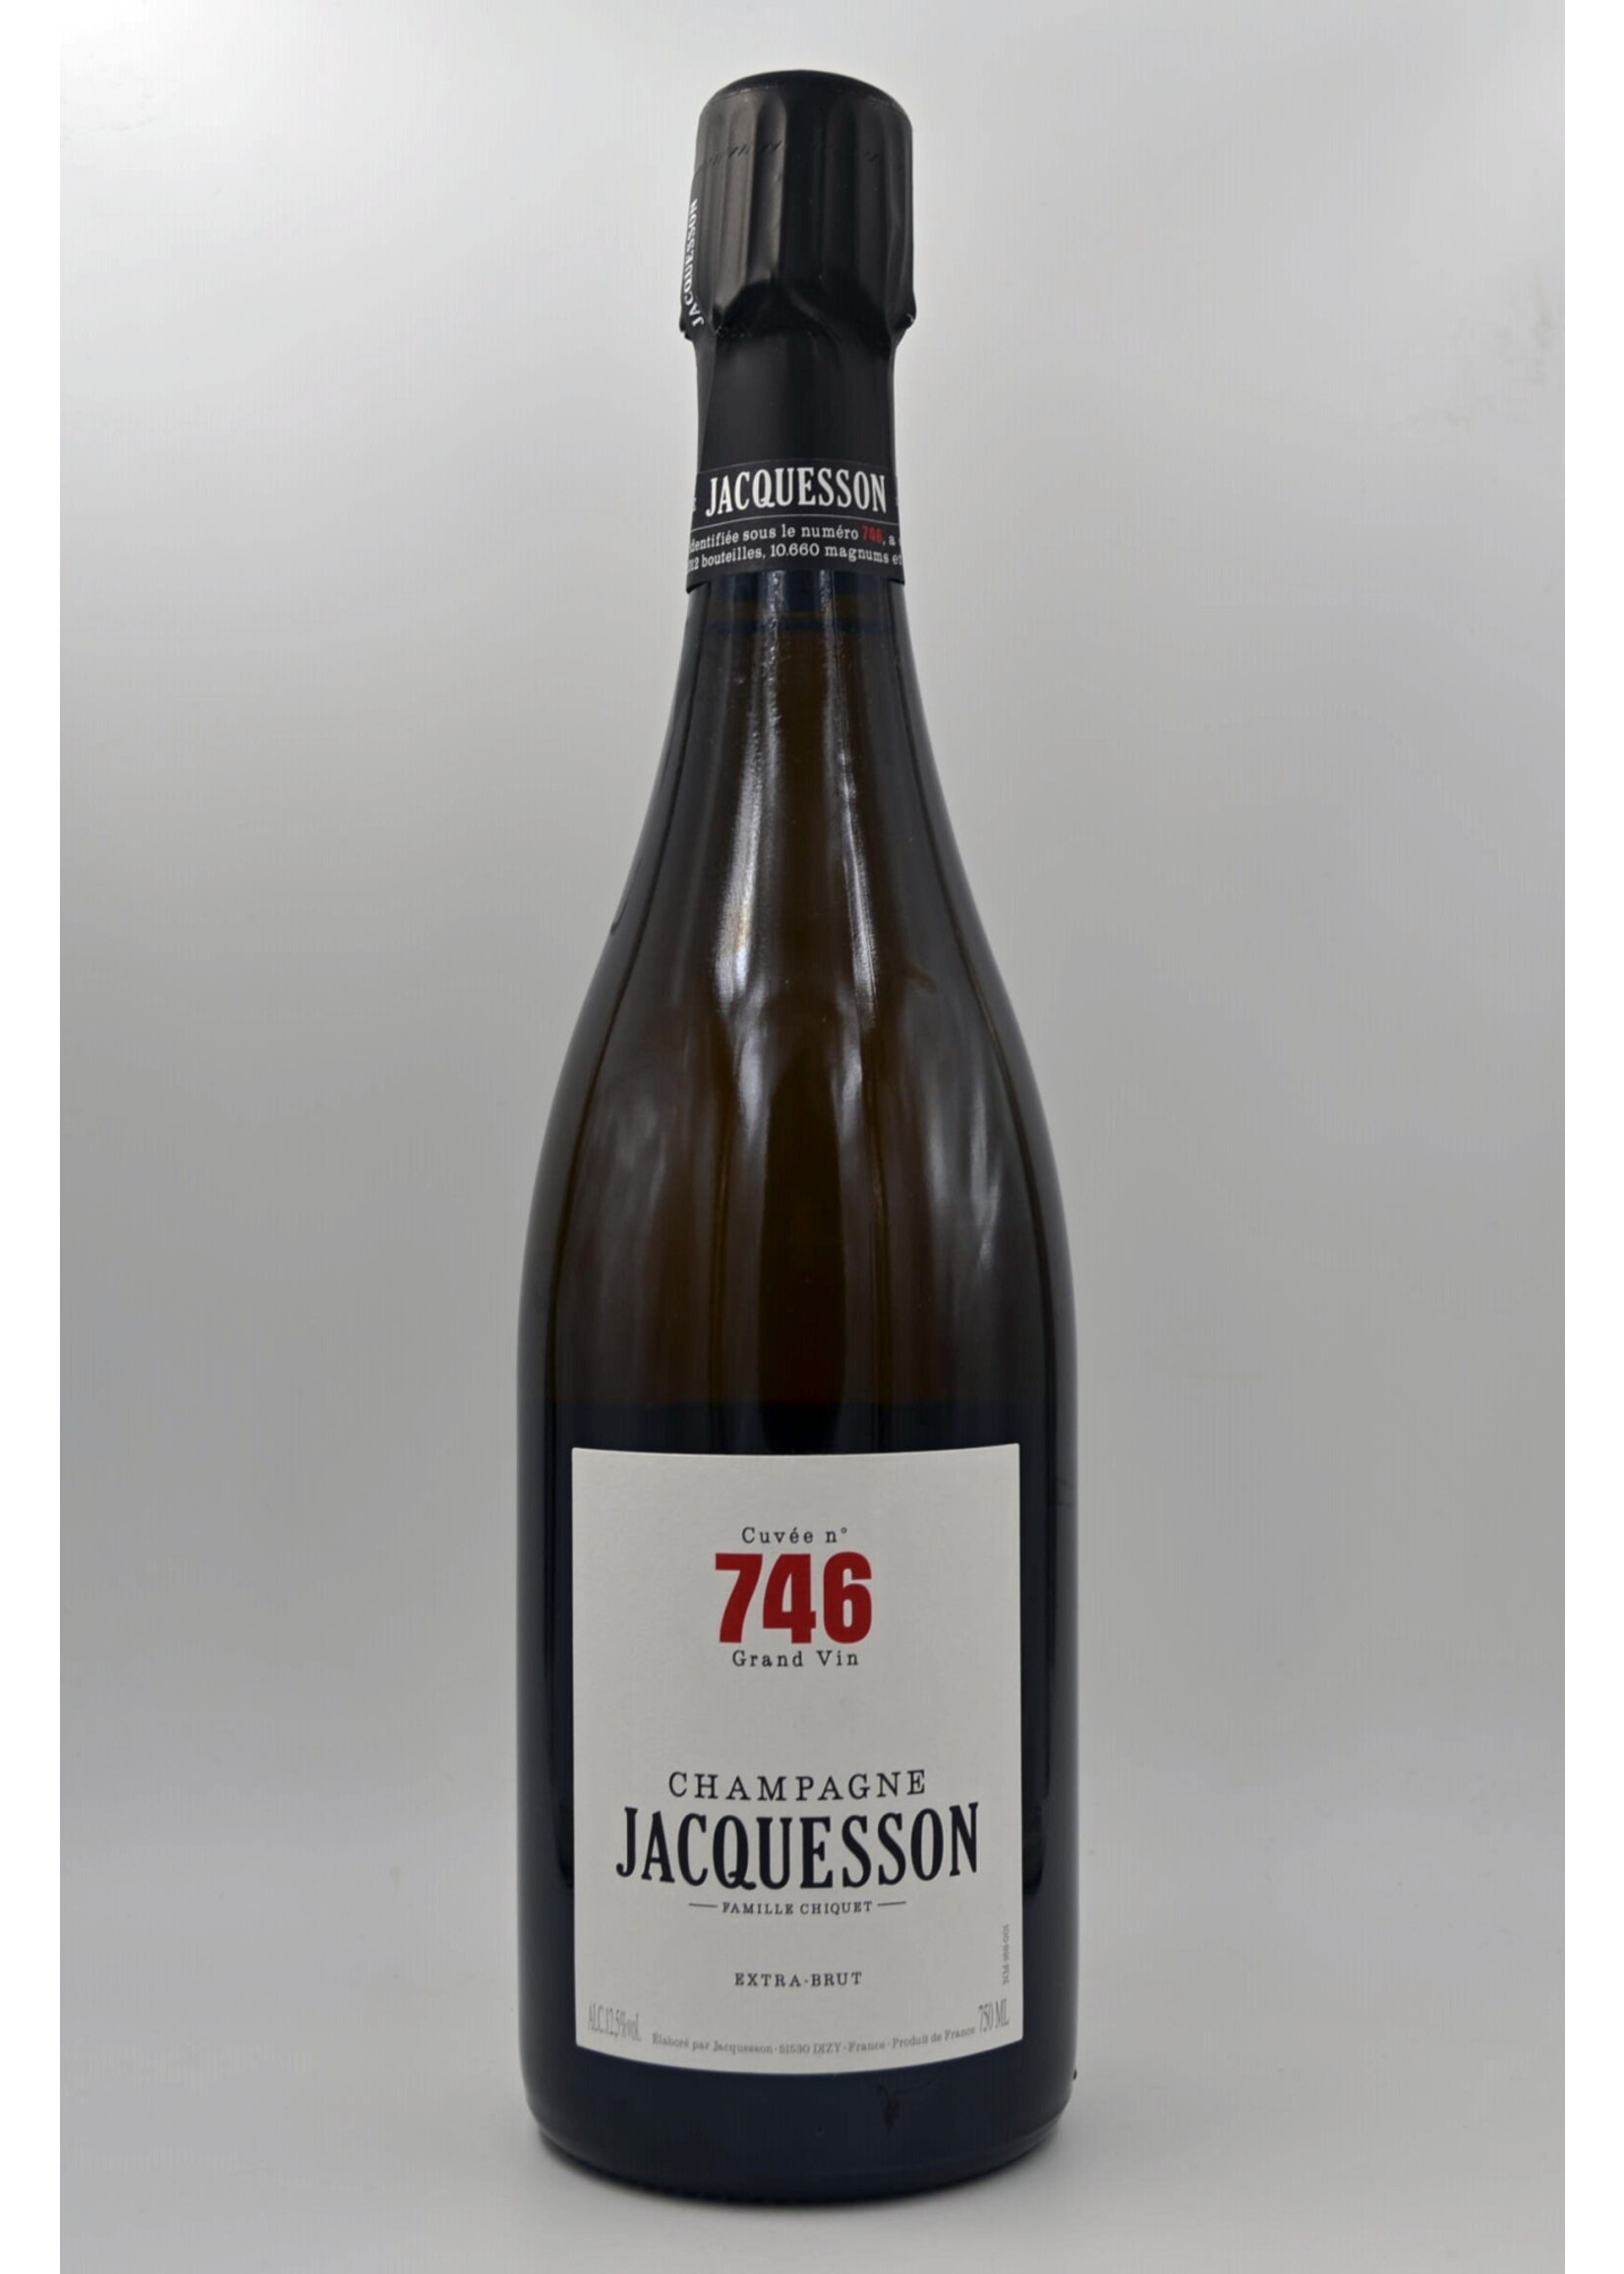 NV Cuvee 746 Extra Brut Jacquesson